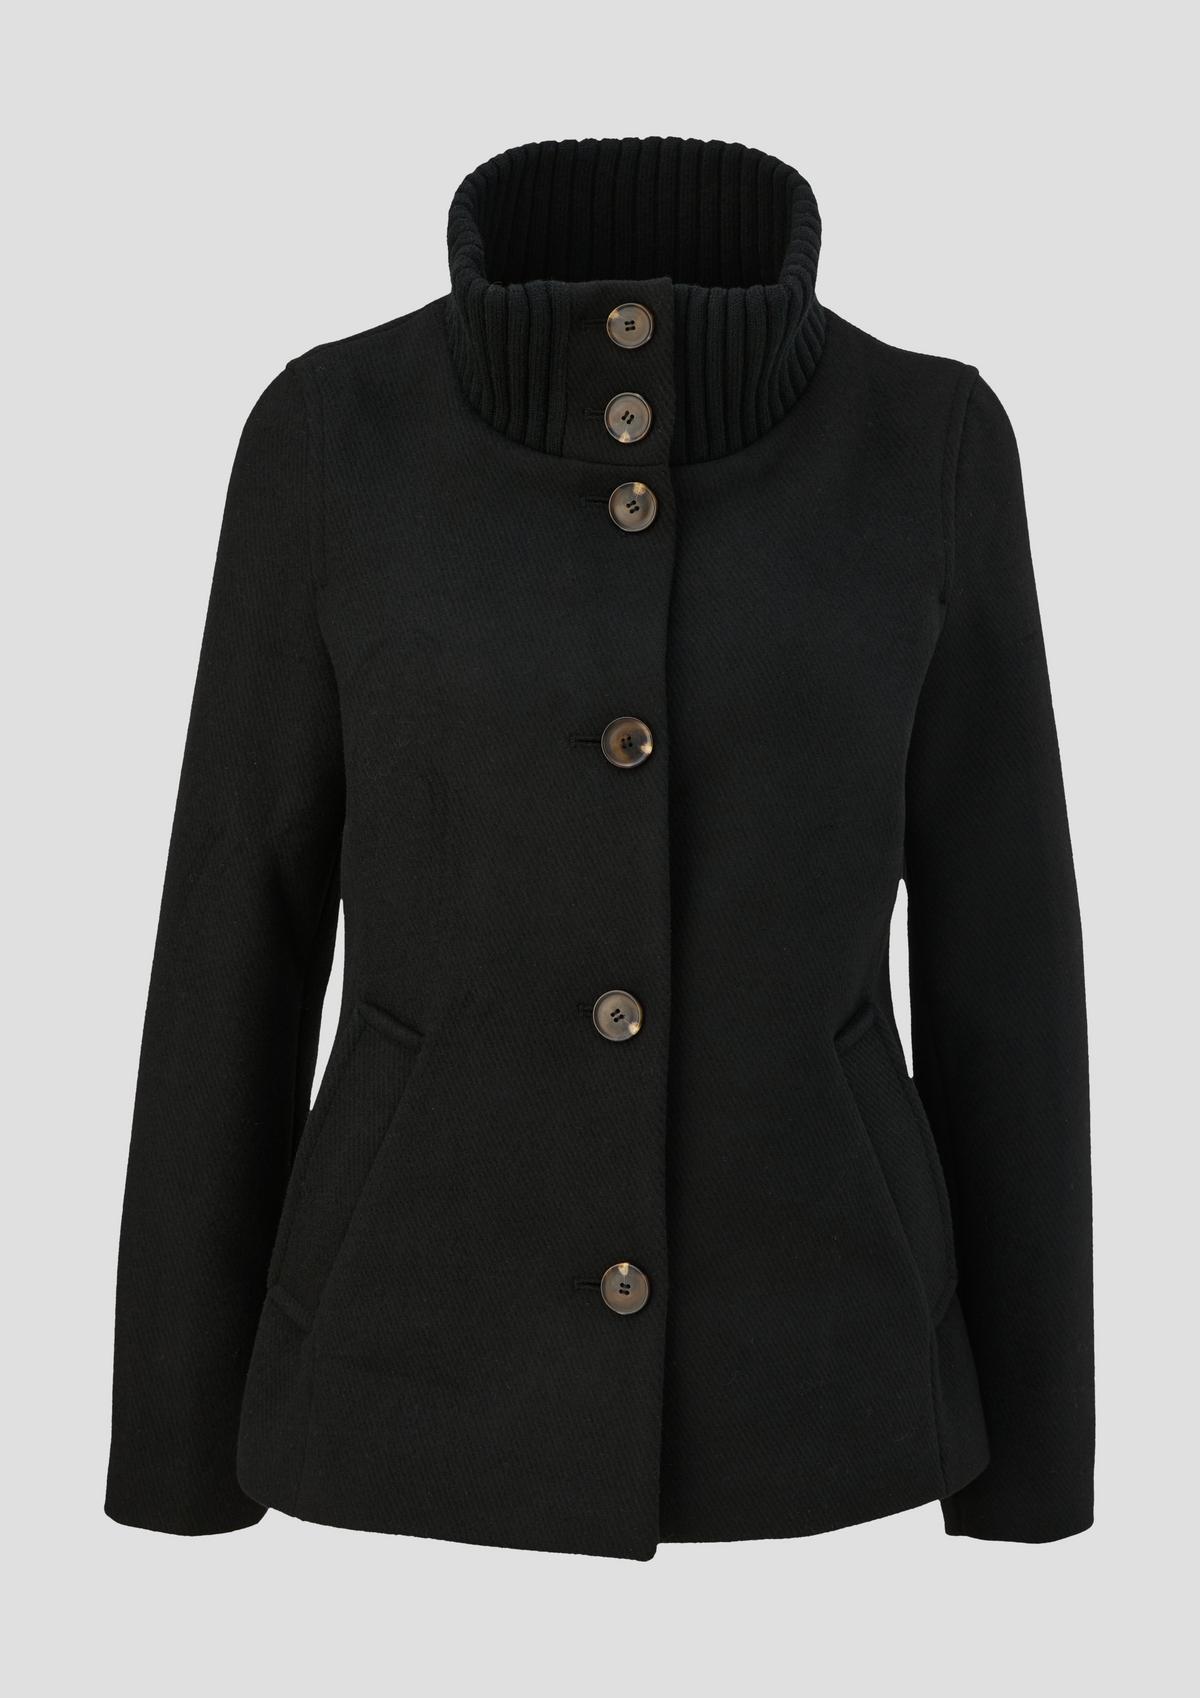 s.Oliver Jacket with a rib knit stand-up collar